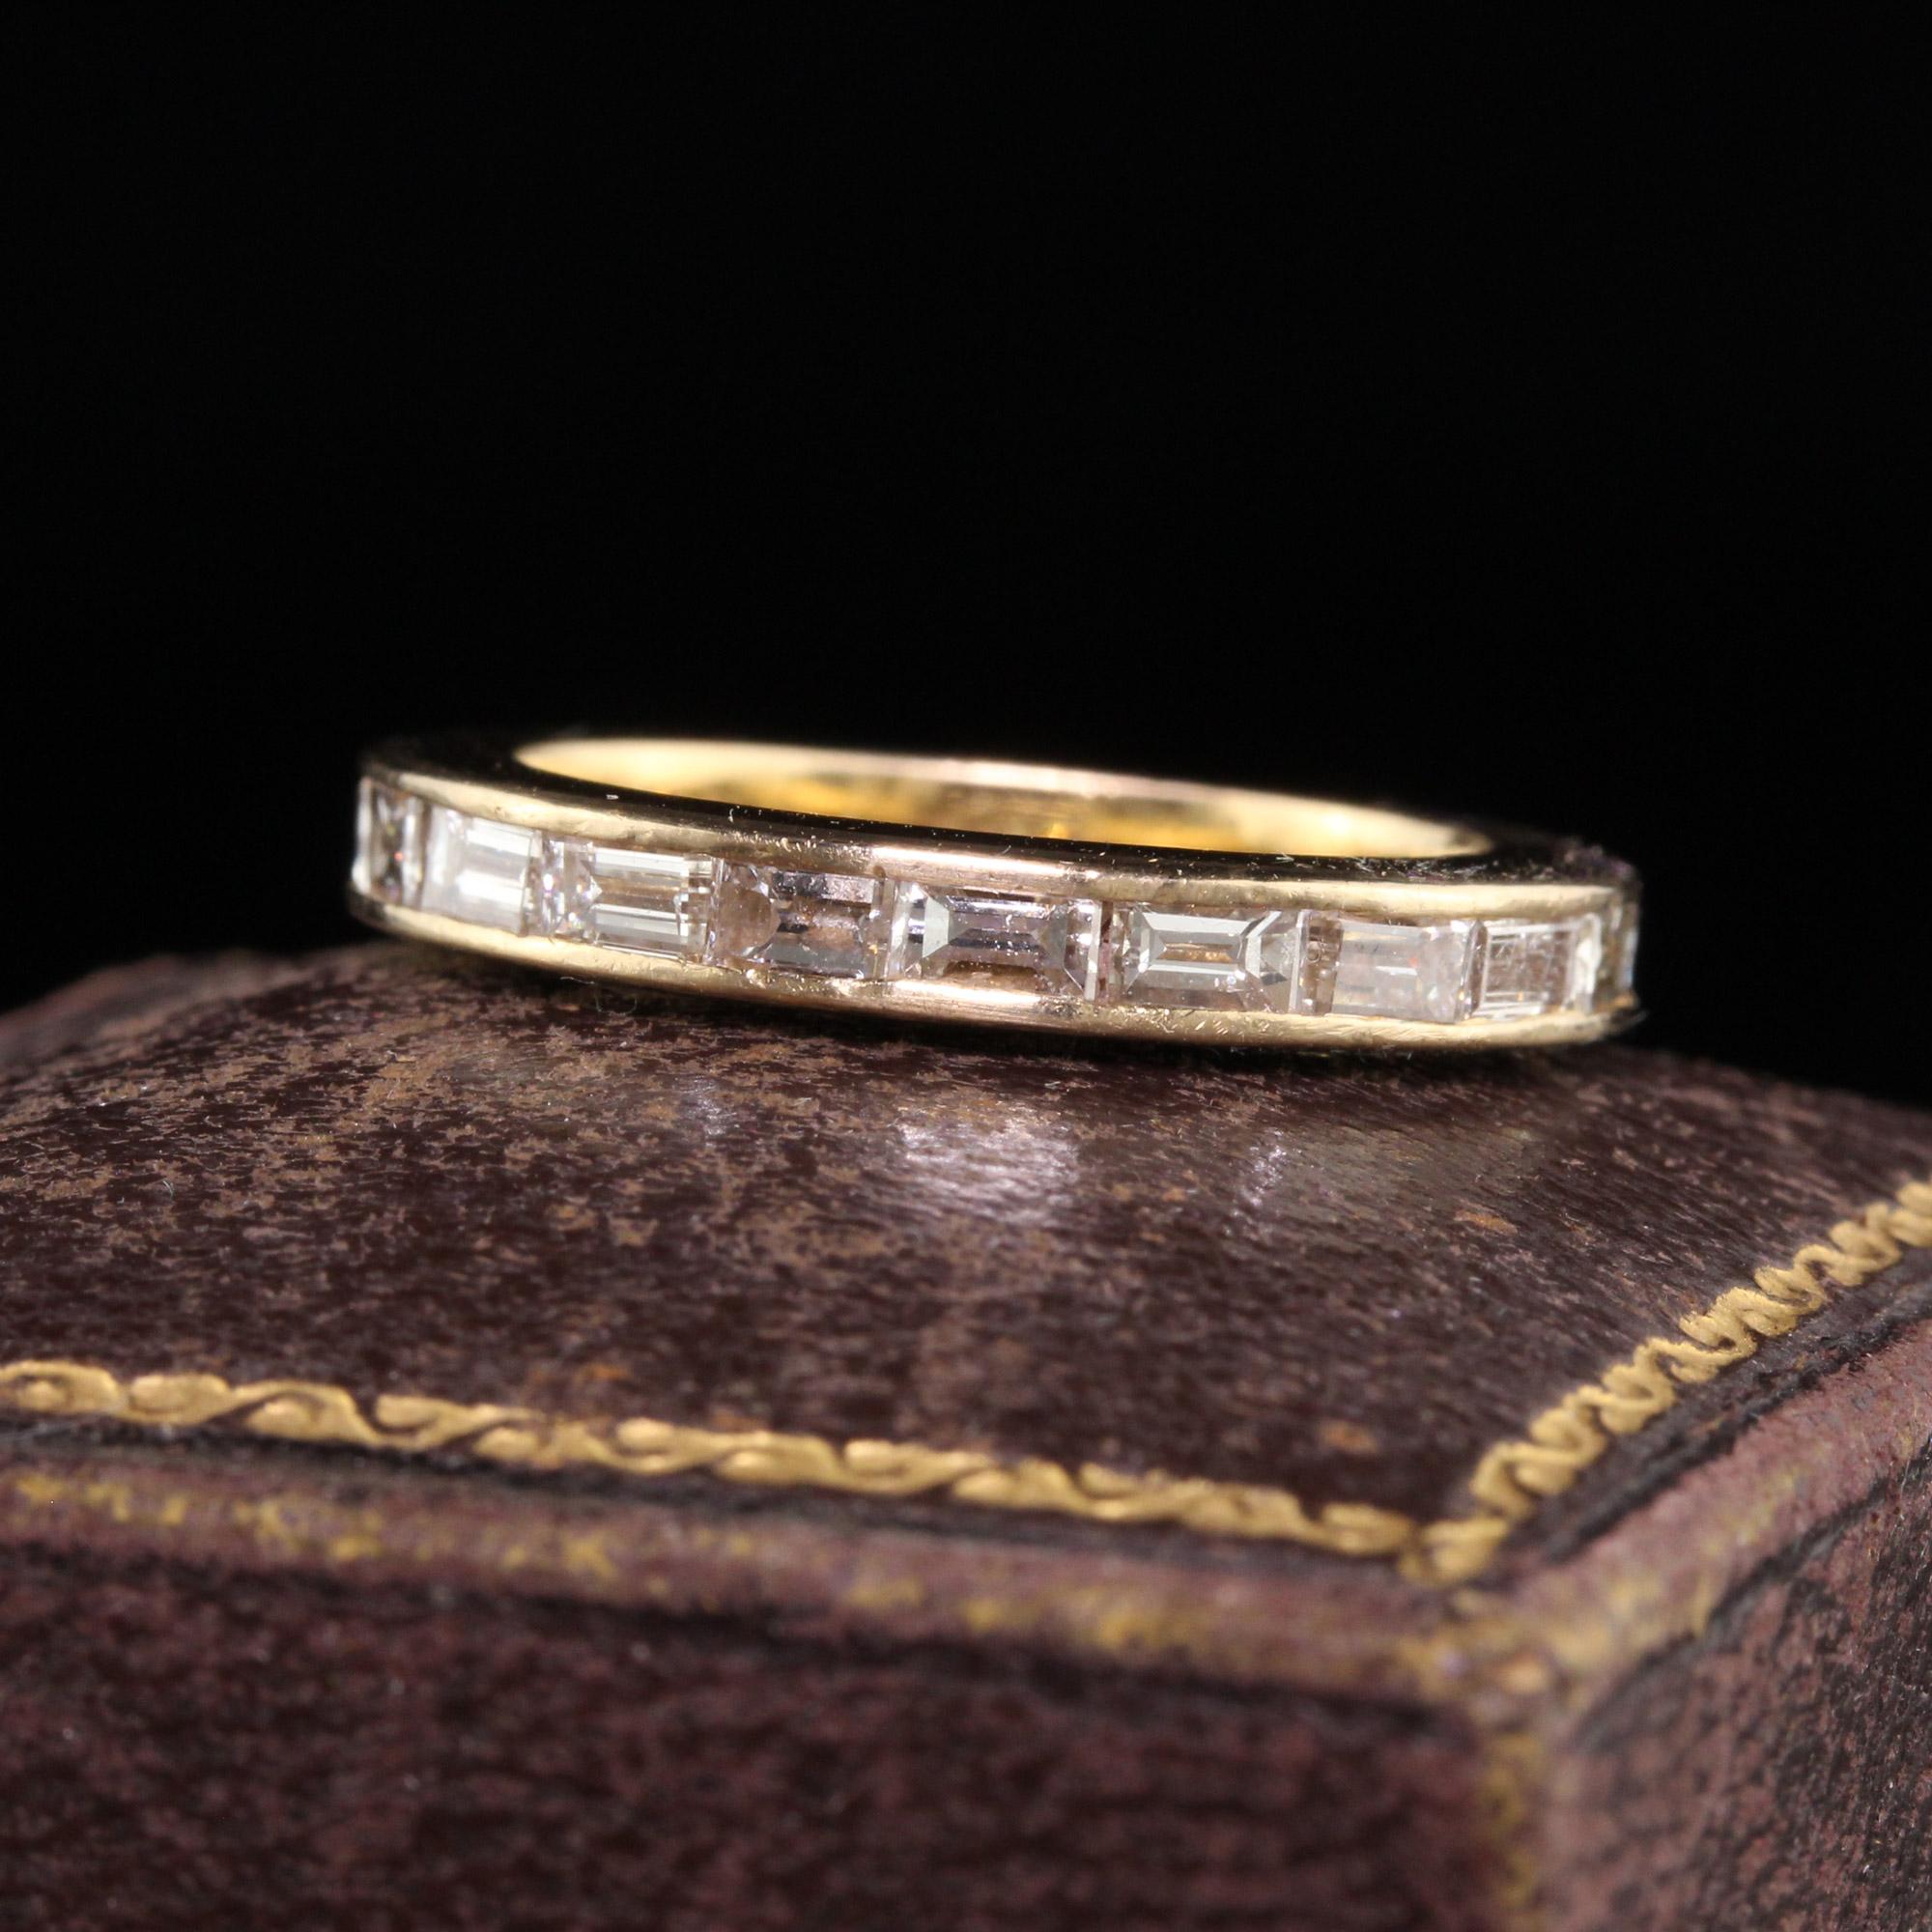 Beautiful Vintage Retro 18K Yellow Gold Baguette Diamond Eternity Band - Size 5. This beautiful eternity band is crafted in 18k yellow gold. The band holds beautiful baguette diamonds going around the entire ring and has one diamonds that is square